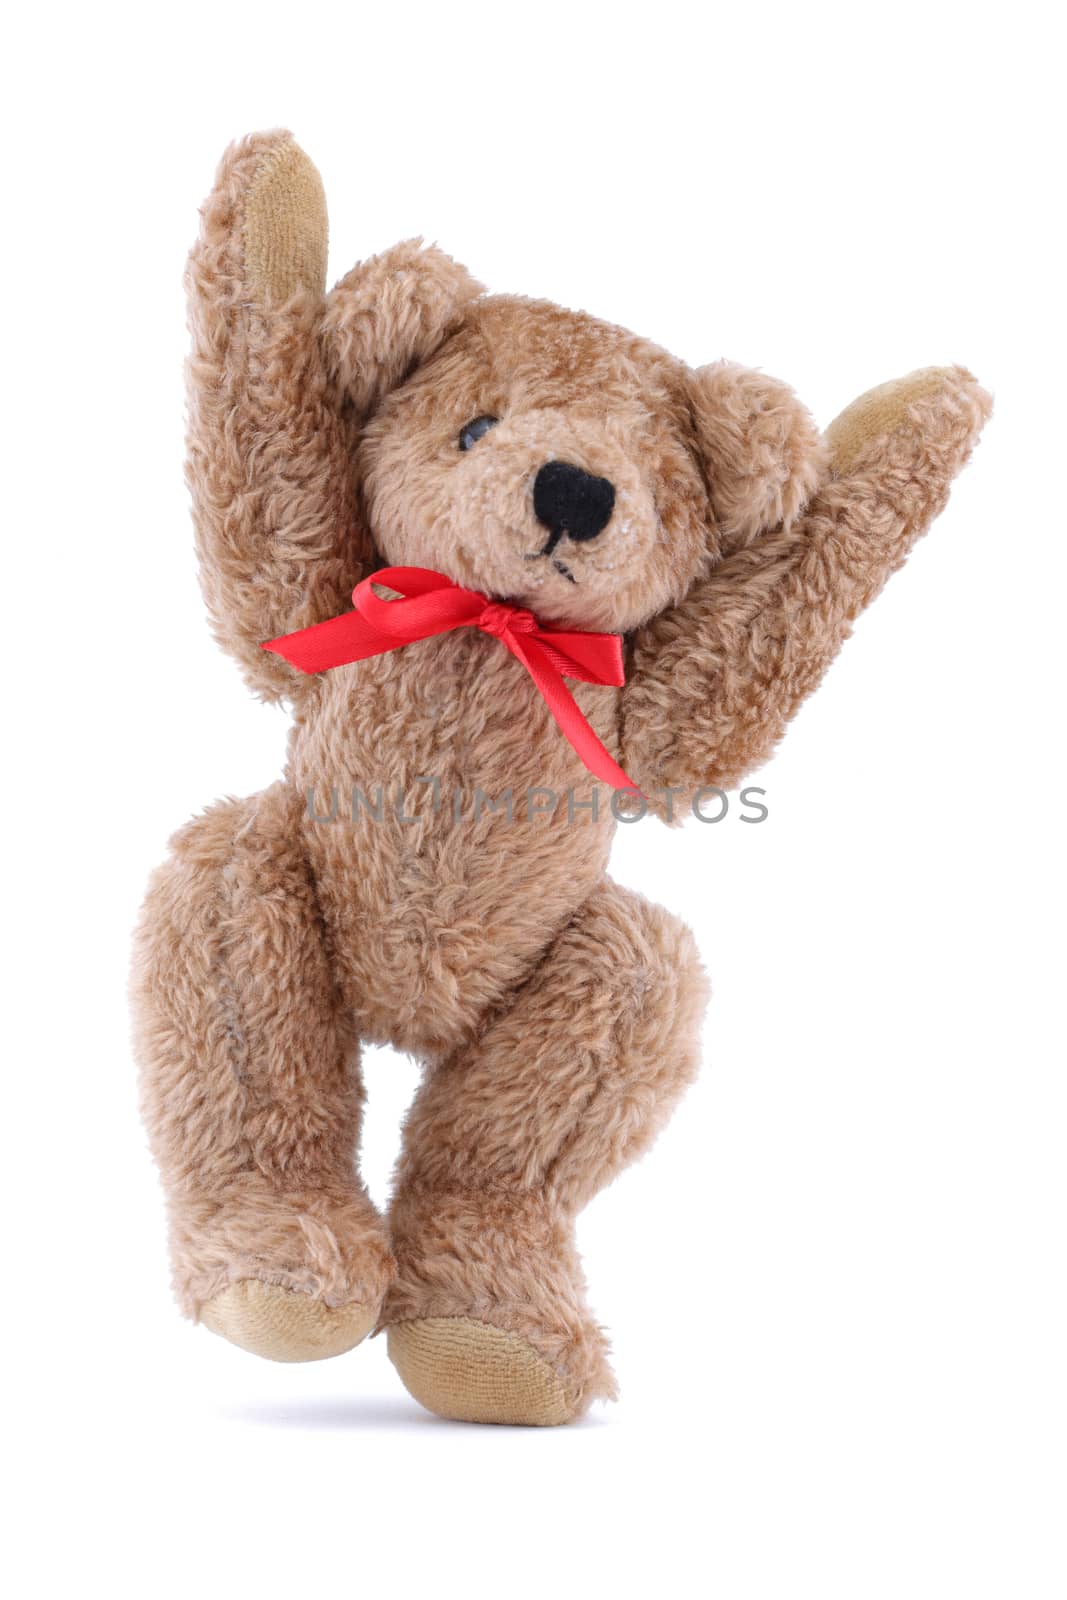 A jumping brown Teddy bear with red ribbon on white background